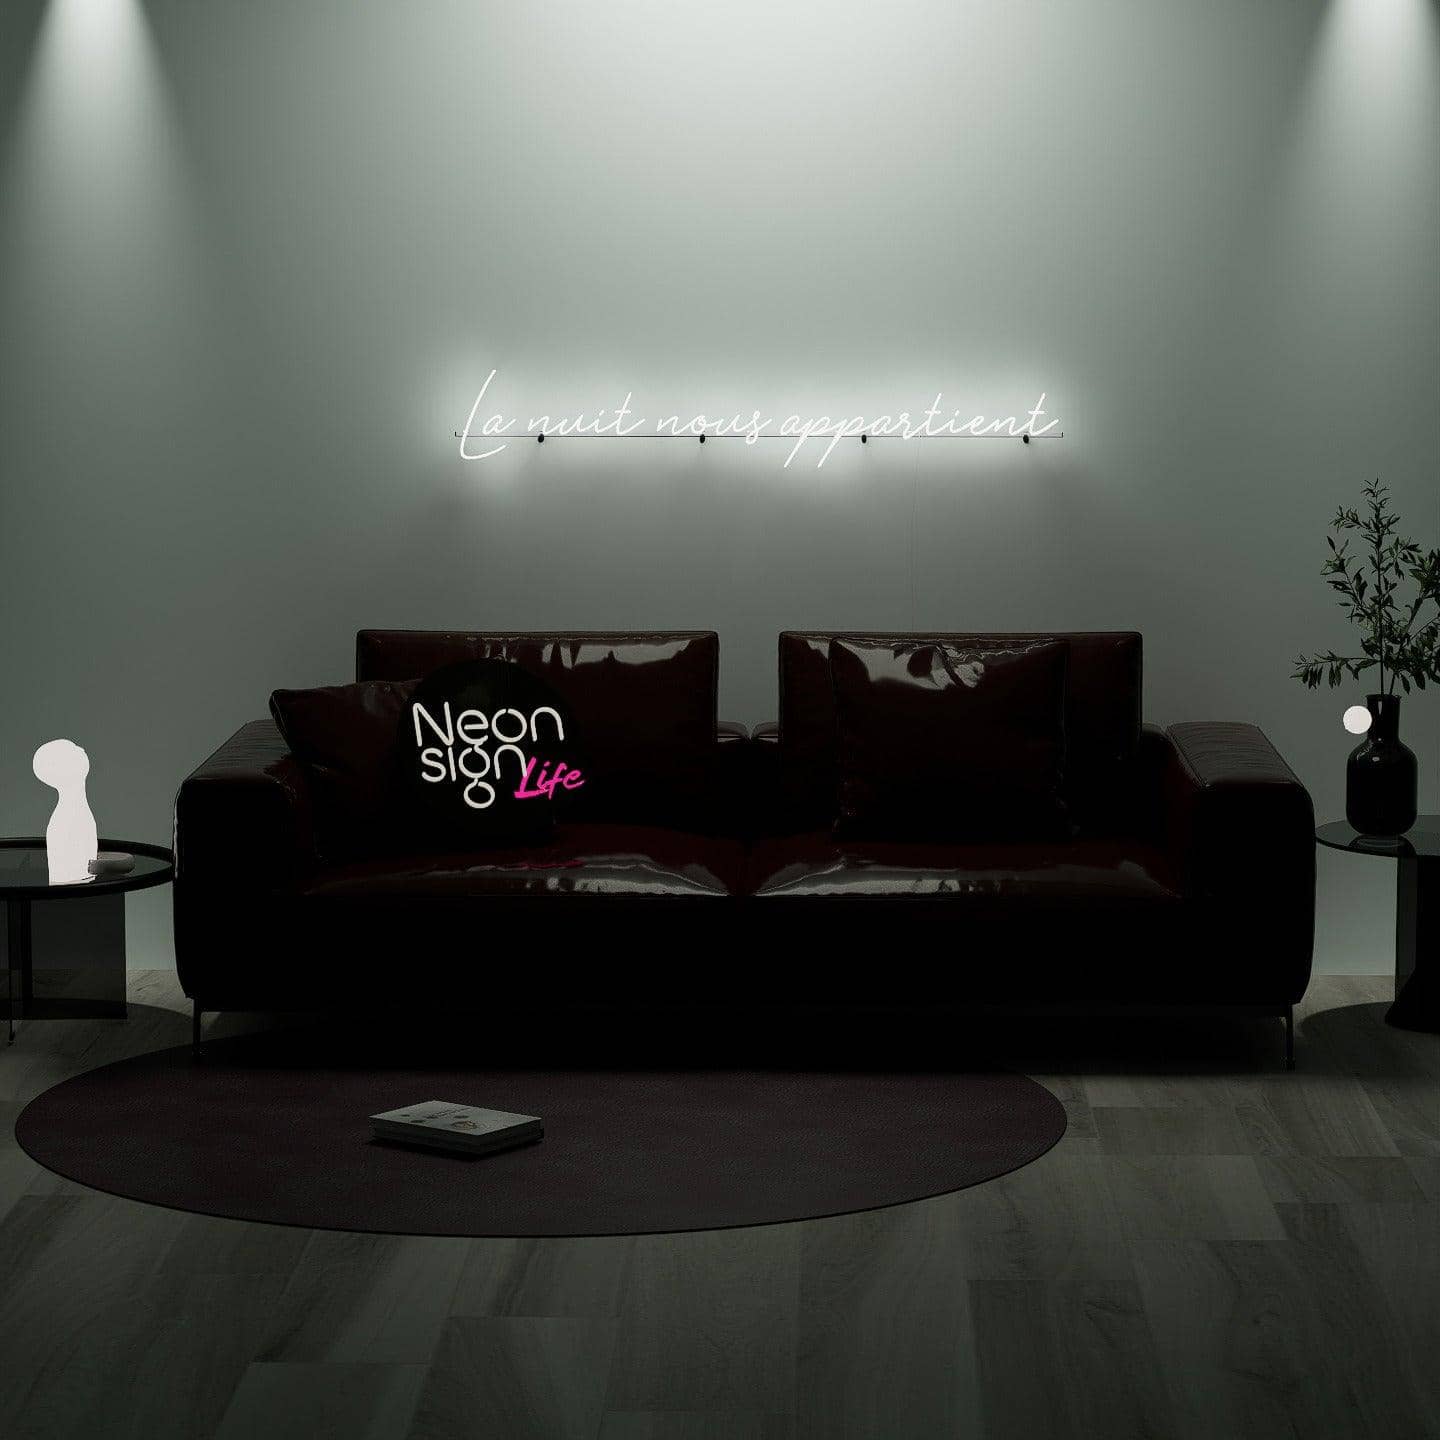 white-neon-lights-illuminated-at-night-and-hung-on-the-wall-for-display-la-nuit-nous-appartient